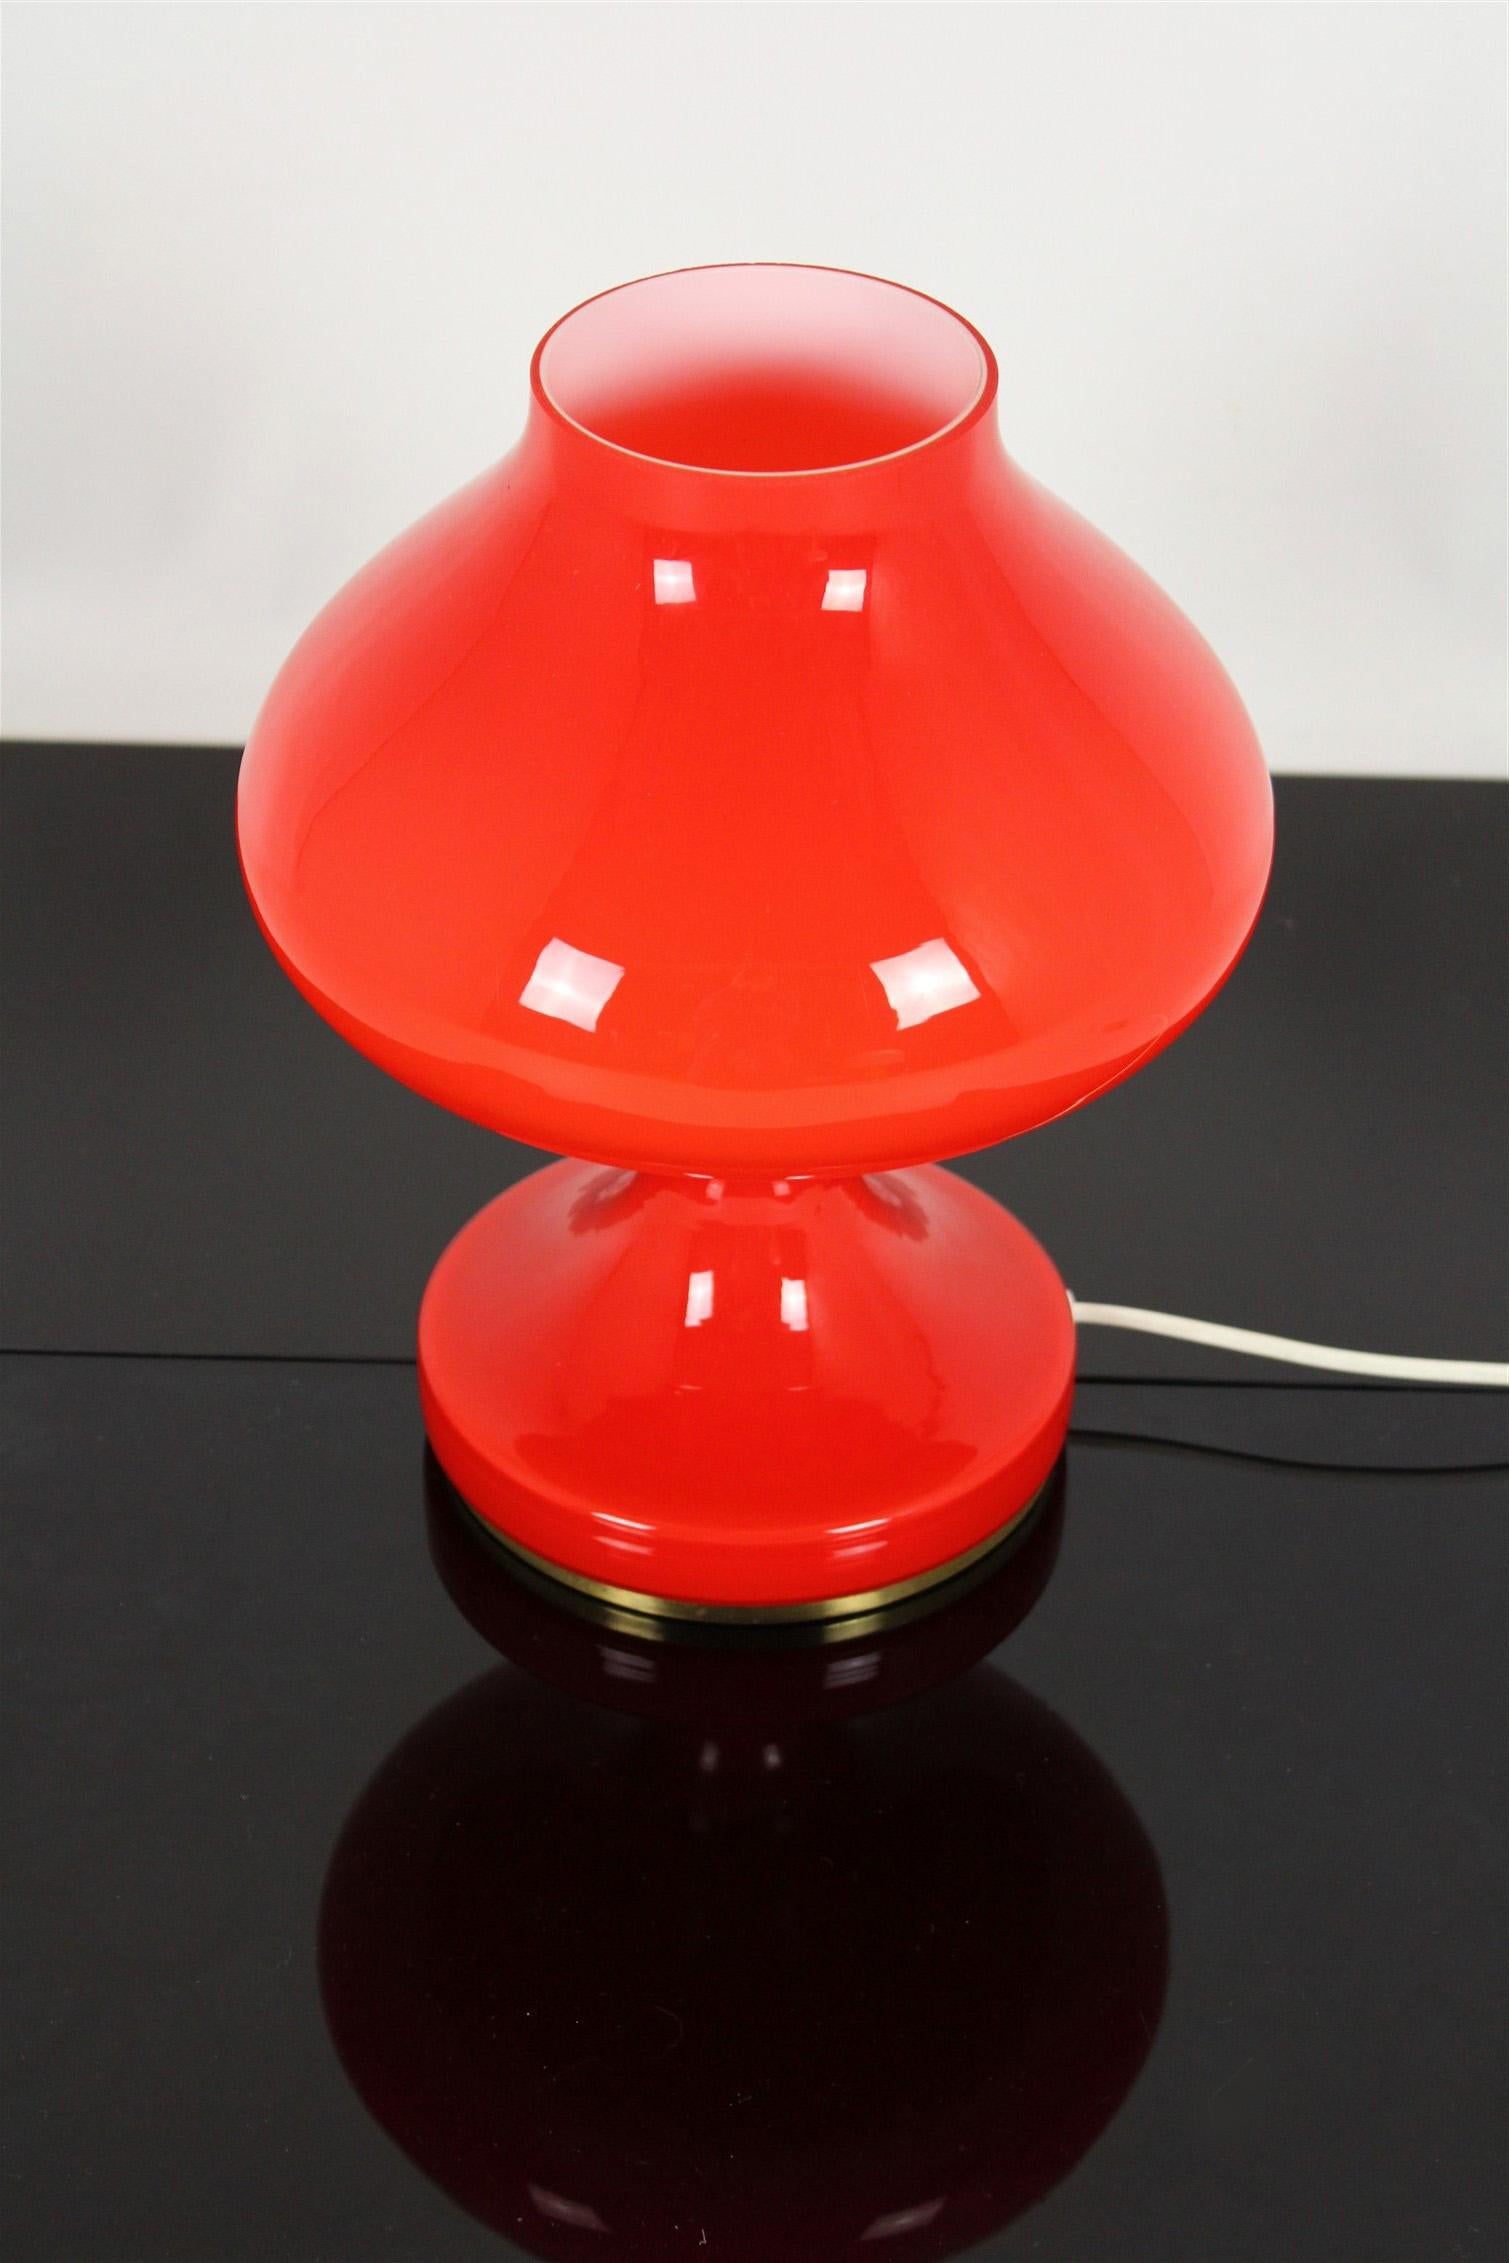 This glass table lamp was designed by Štepán Tabera and produced by OPP Jihlava in Czechoslovakia in the 1970s. The lamp is in very good vintage condition, fully functional.